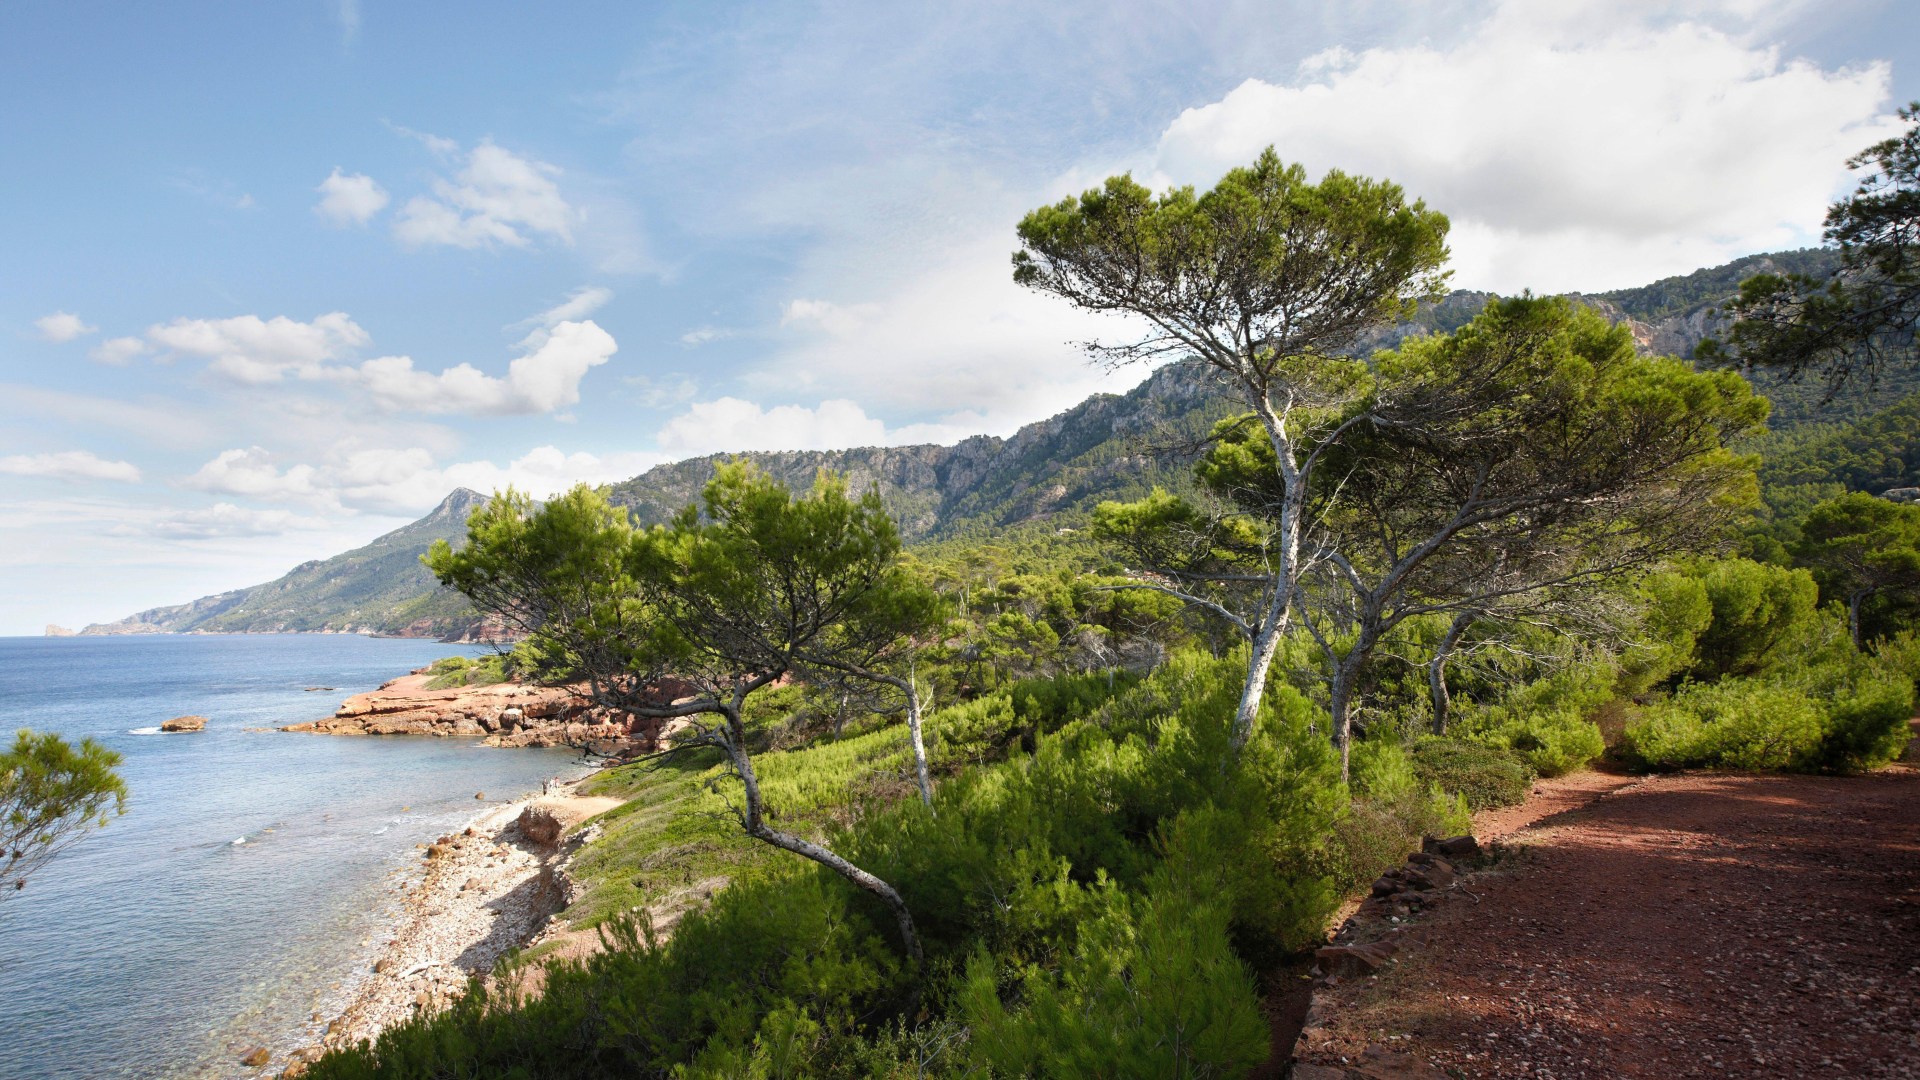 Discover Spain’s Hidden Gem Beach Voted ‘Most Magical Place in the World’ – Perfect for Kids!